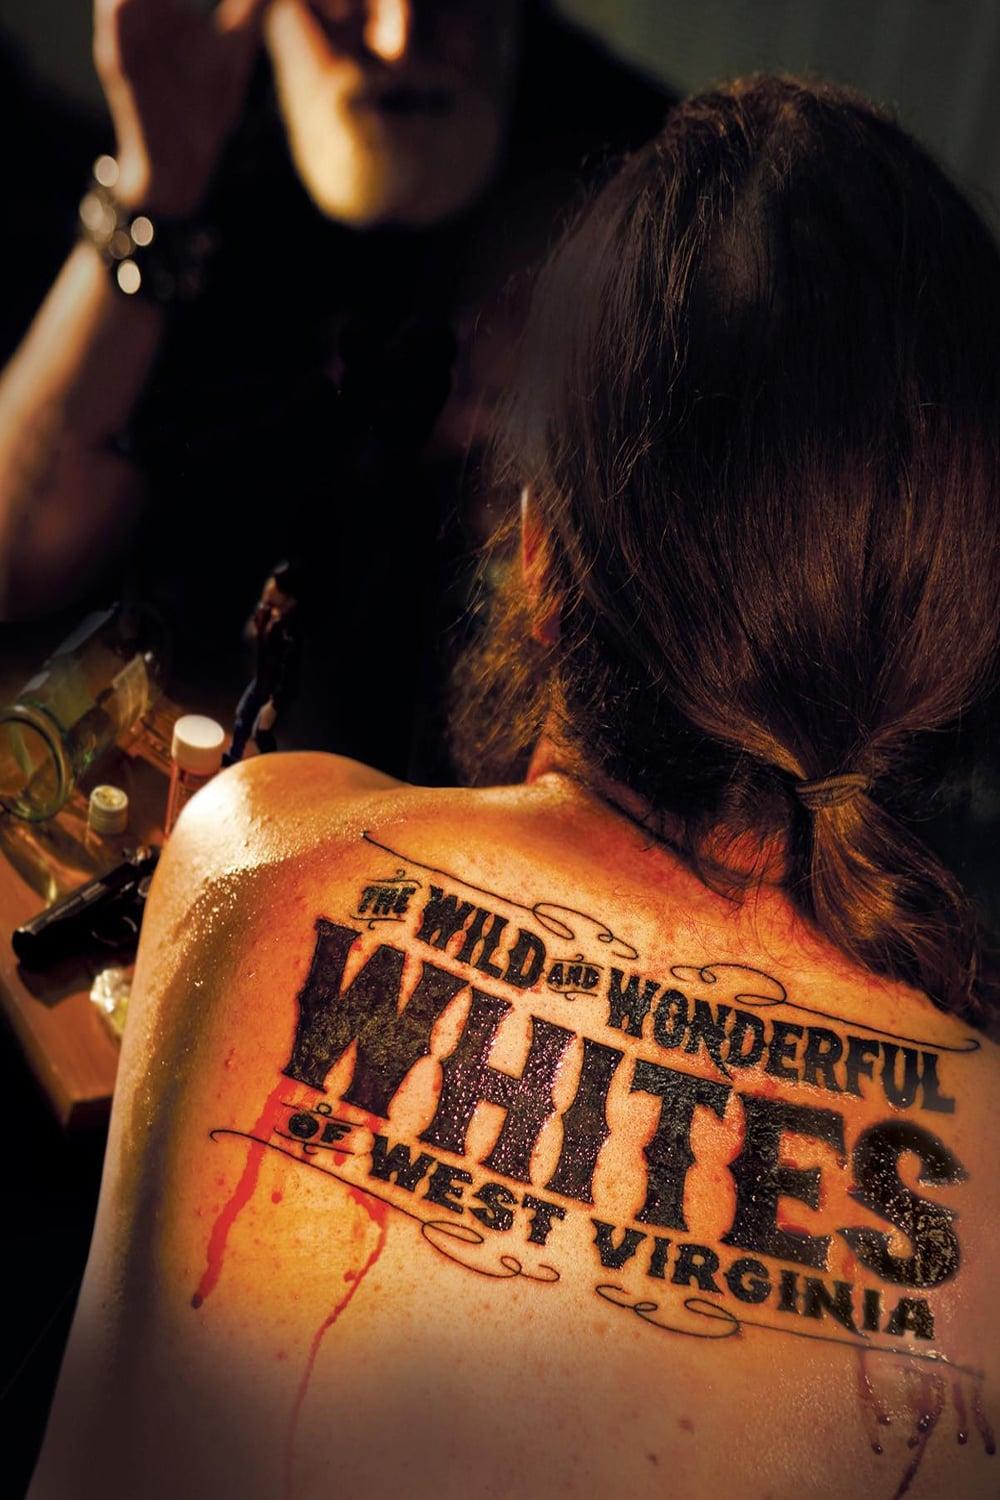 The Wild and Wonderful Whites of West Virginia poster